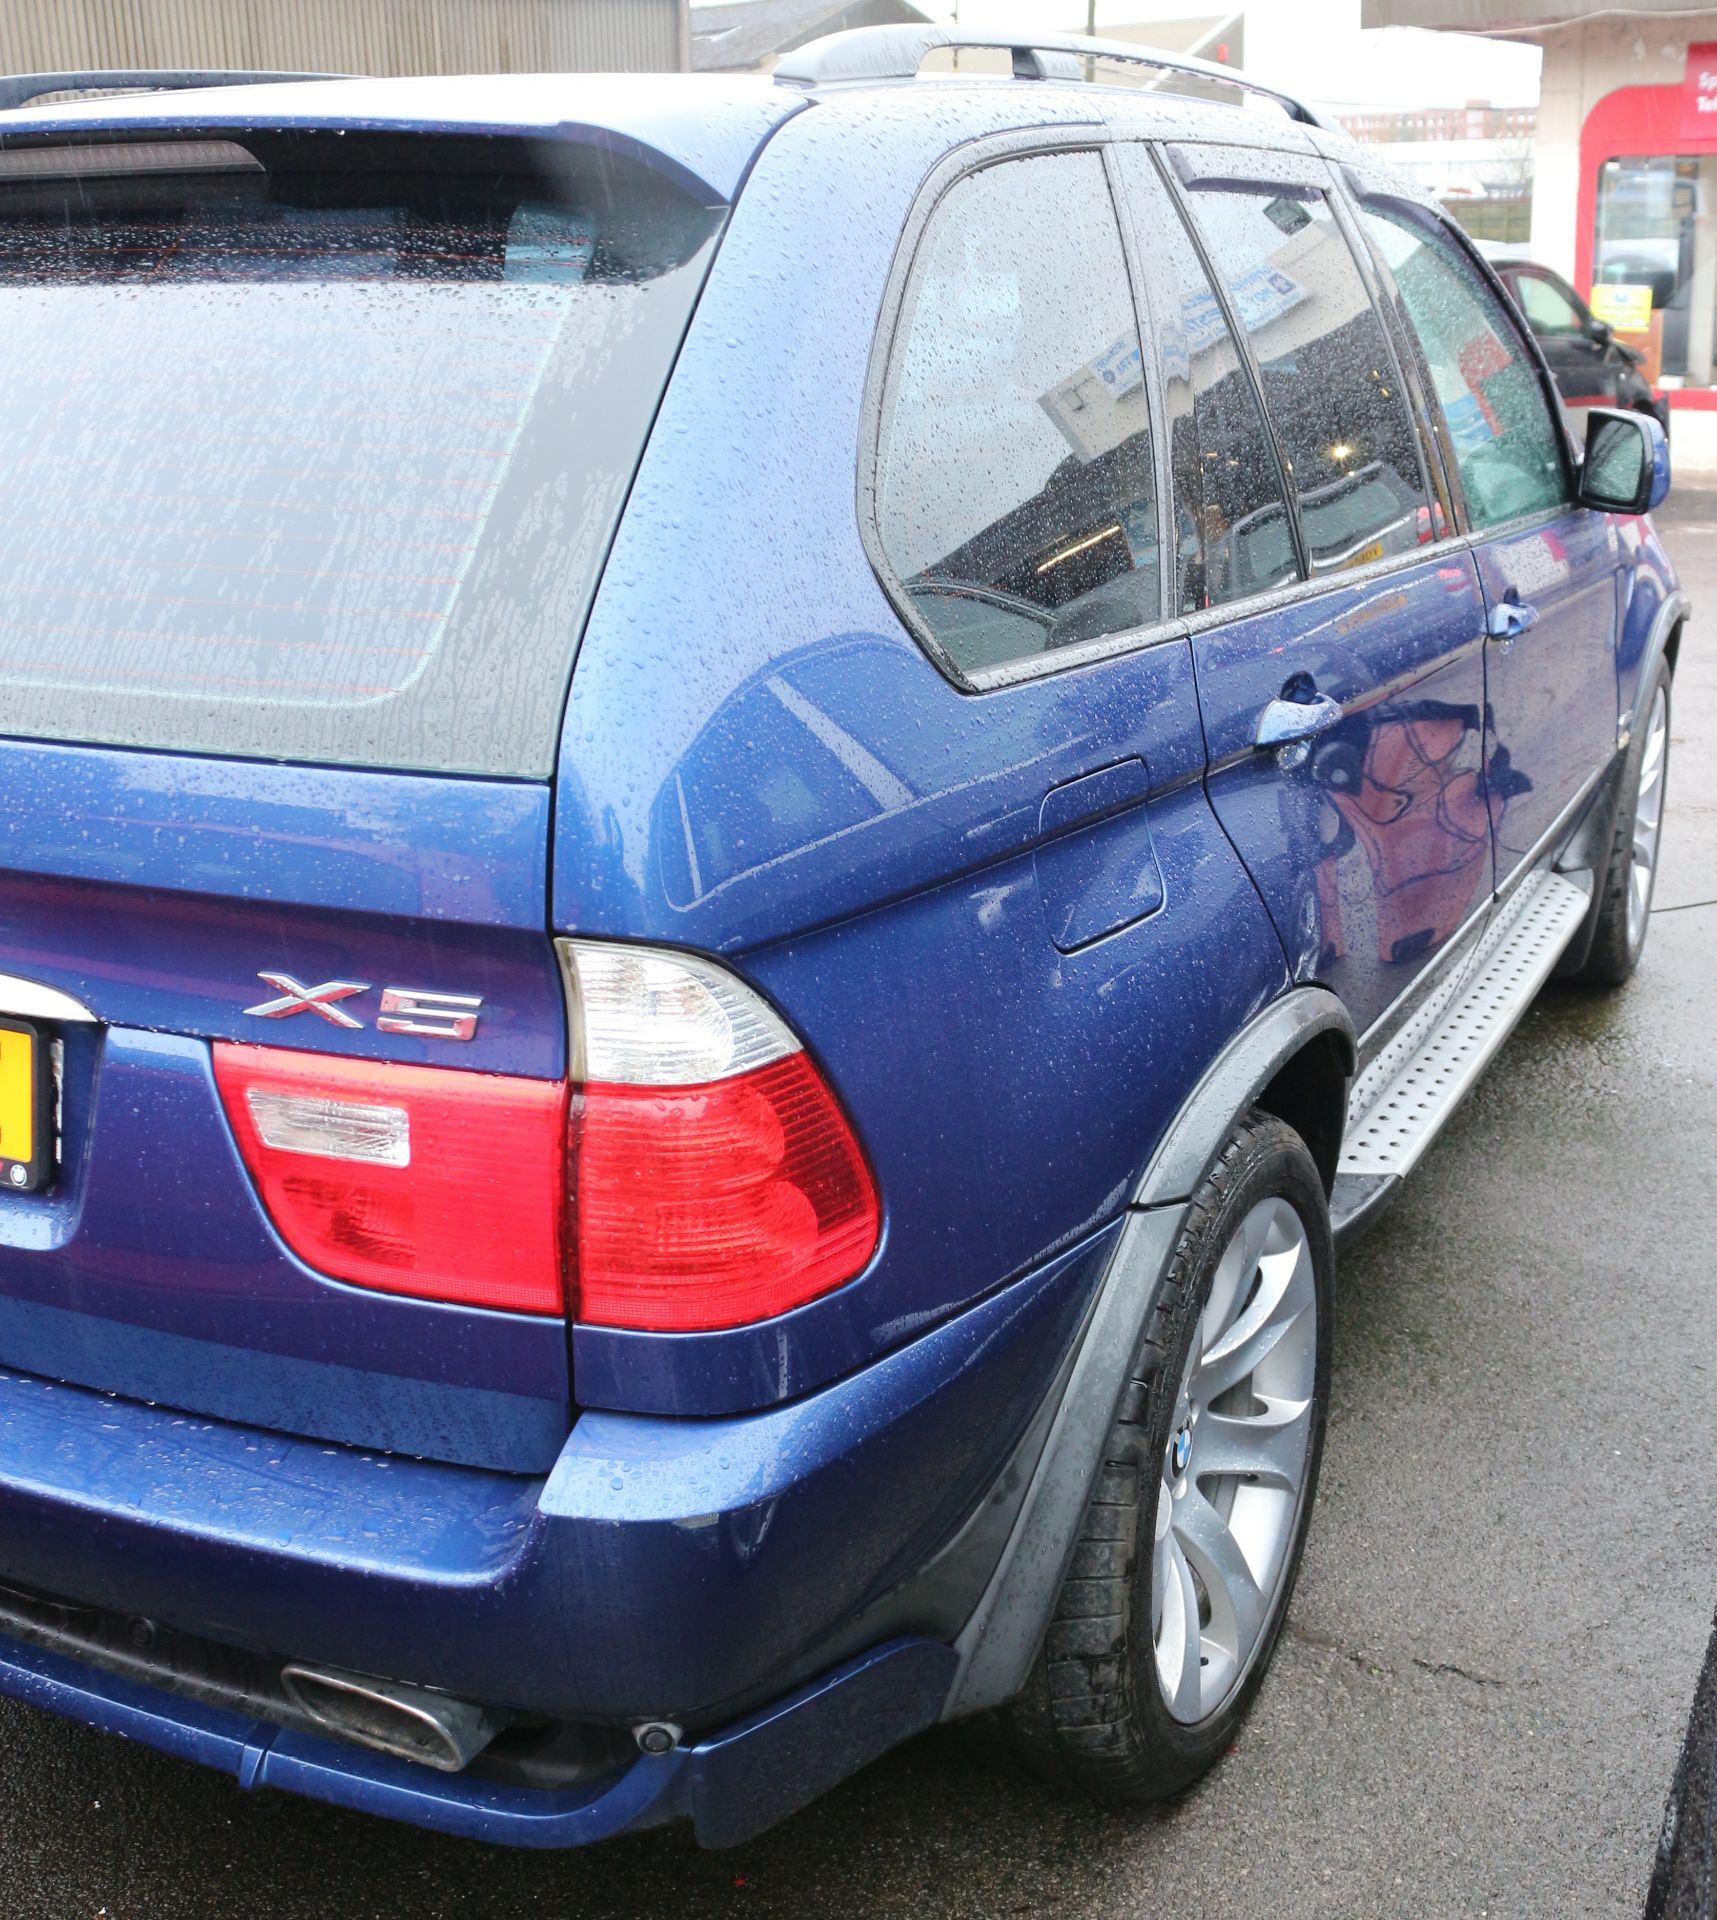 BMW X5, X5 IS FACE LIFT MODEL, HN54 FXZ, 4-8 IS, PETROL, AUTOMATIC, 2004, 5 DOOR, CURRENT RECORDED - Image 3 of 15